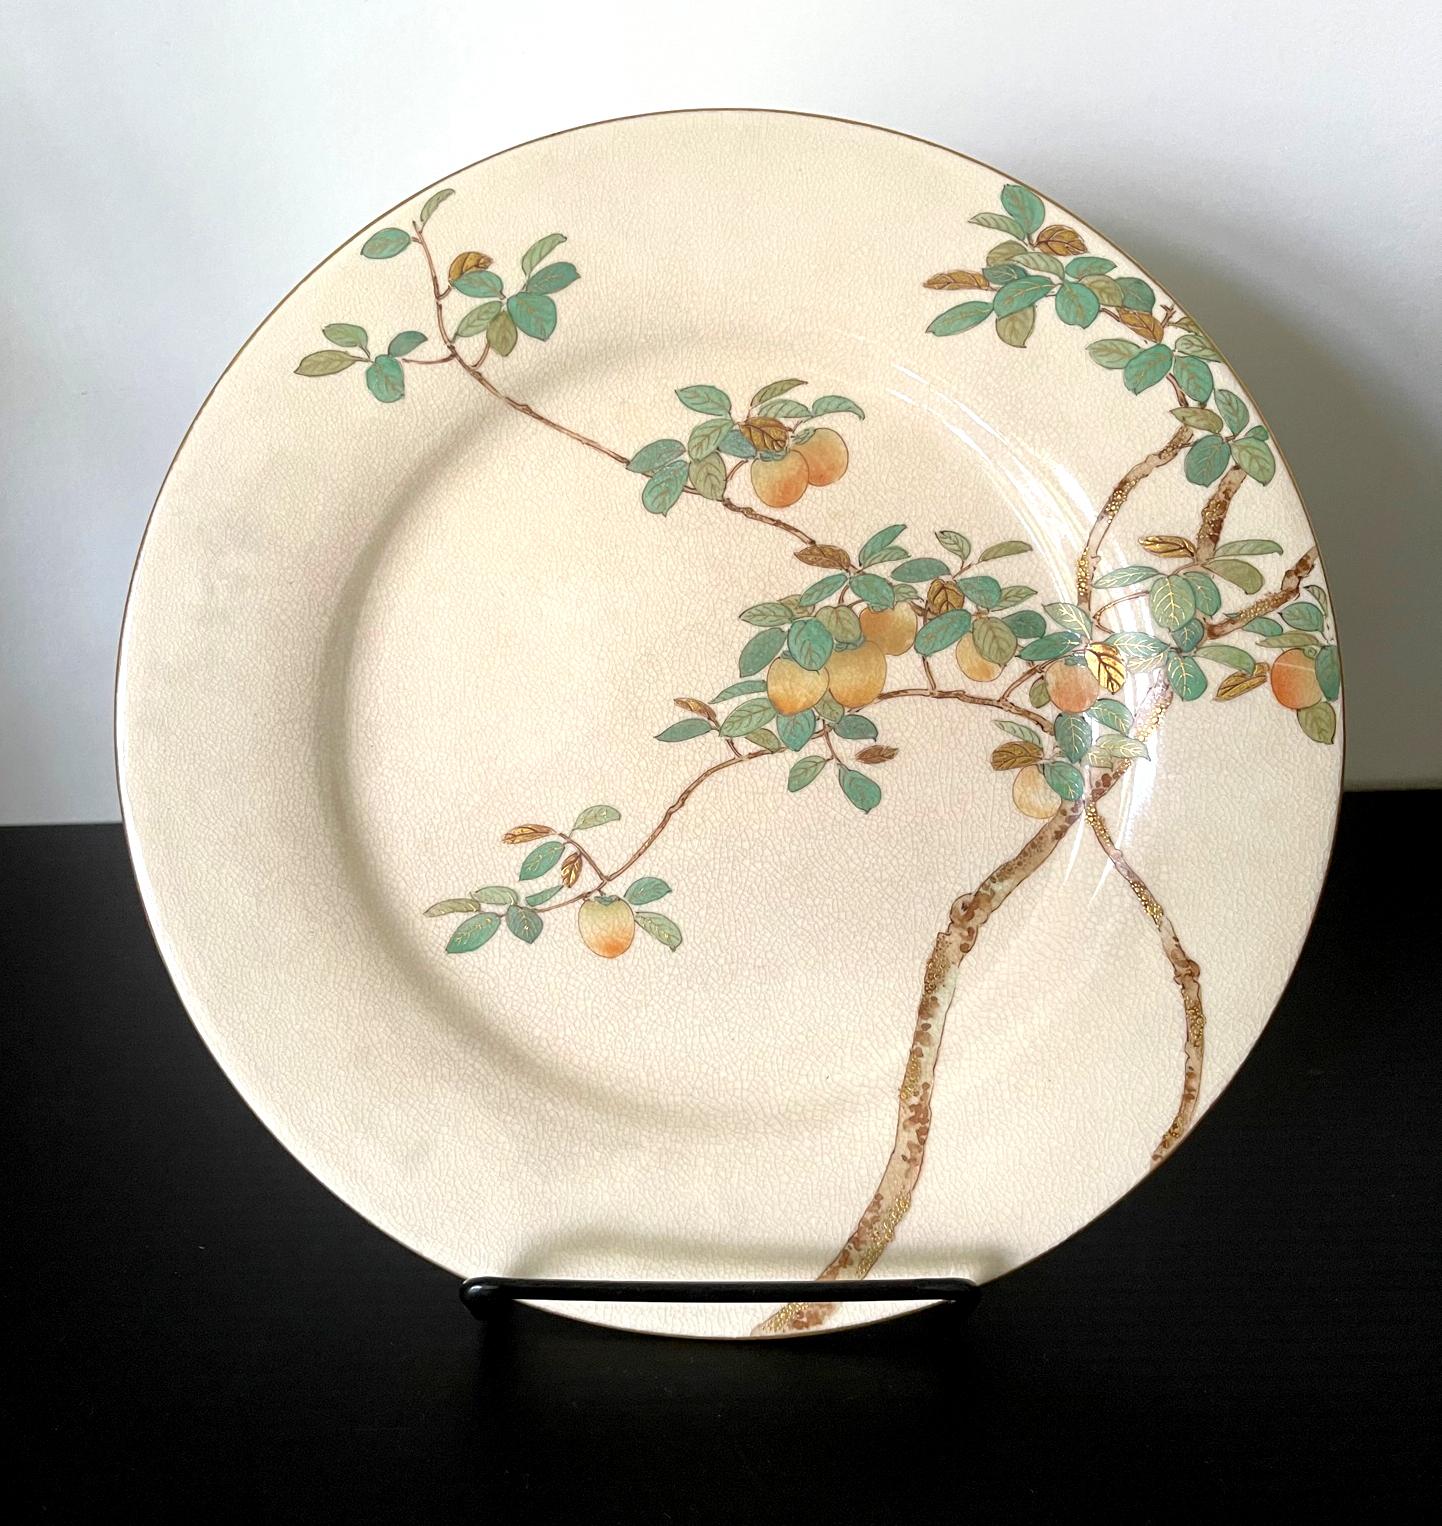 A fine Japanese ceramic satsuma plate made by Kinkozan and retailed by Yamanaka & Co. circa 1900-20s (late Meiji to early Tasho Period). The cream-color glazed plate features a very fine decoration of a persimmon tree bearing fruits. The composition